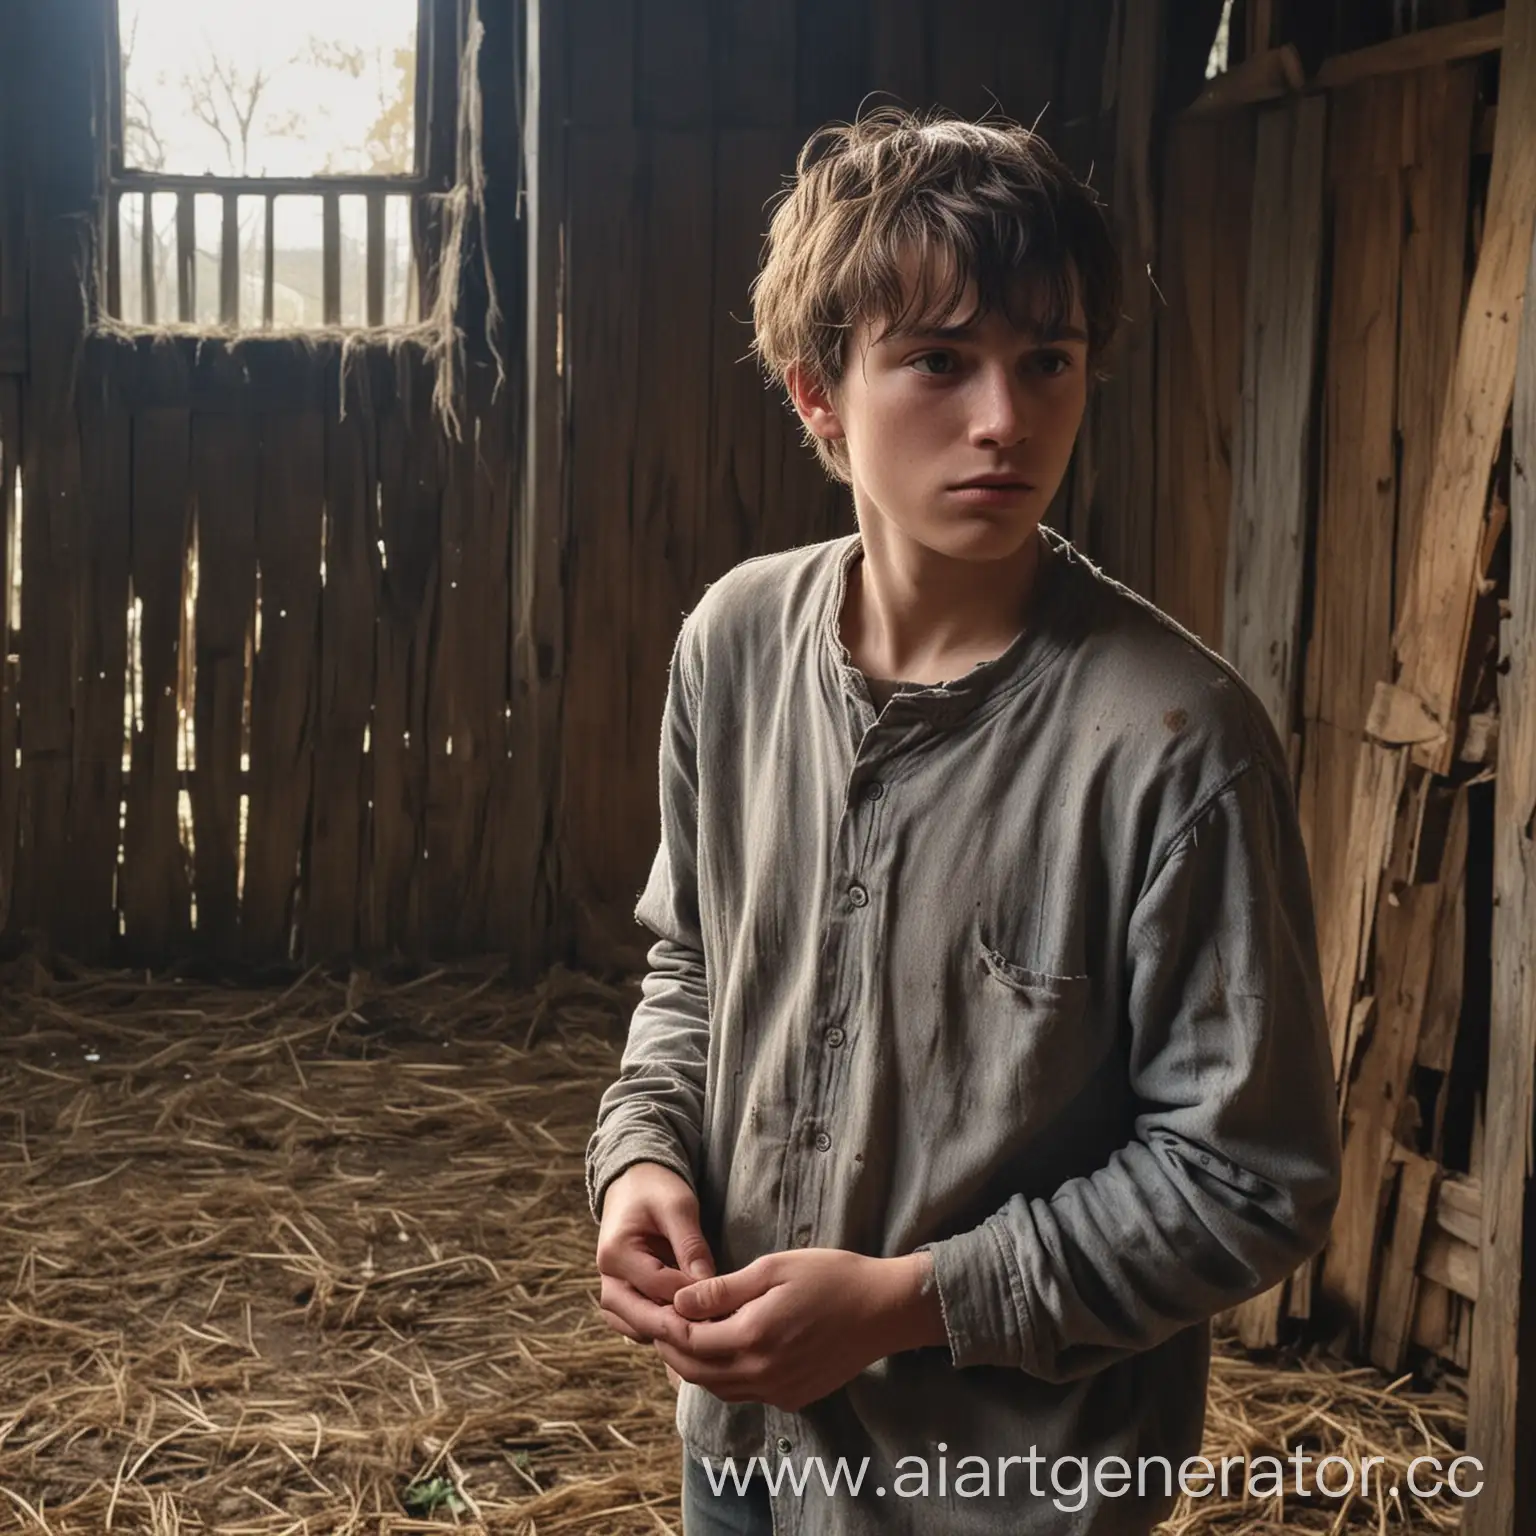 A young guy was abandoned by his mother and he was left alone in an old barn